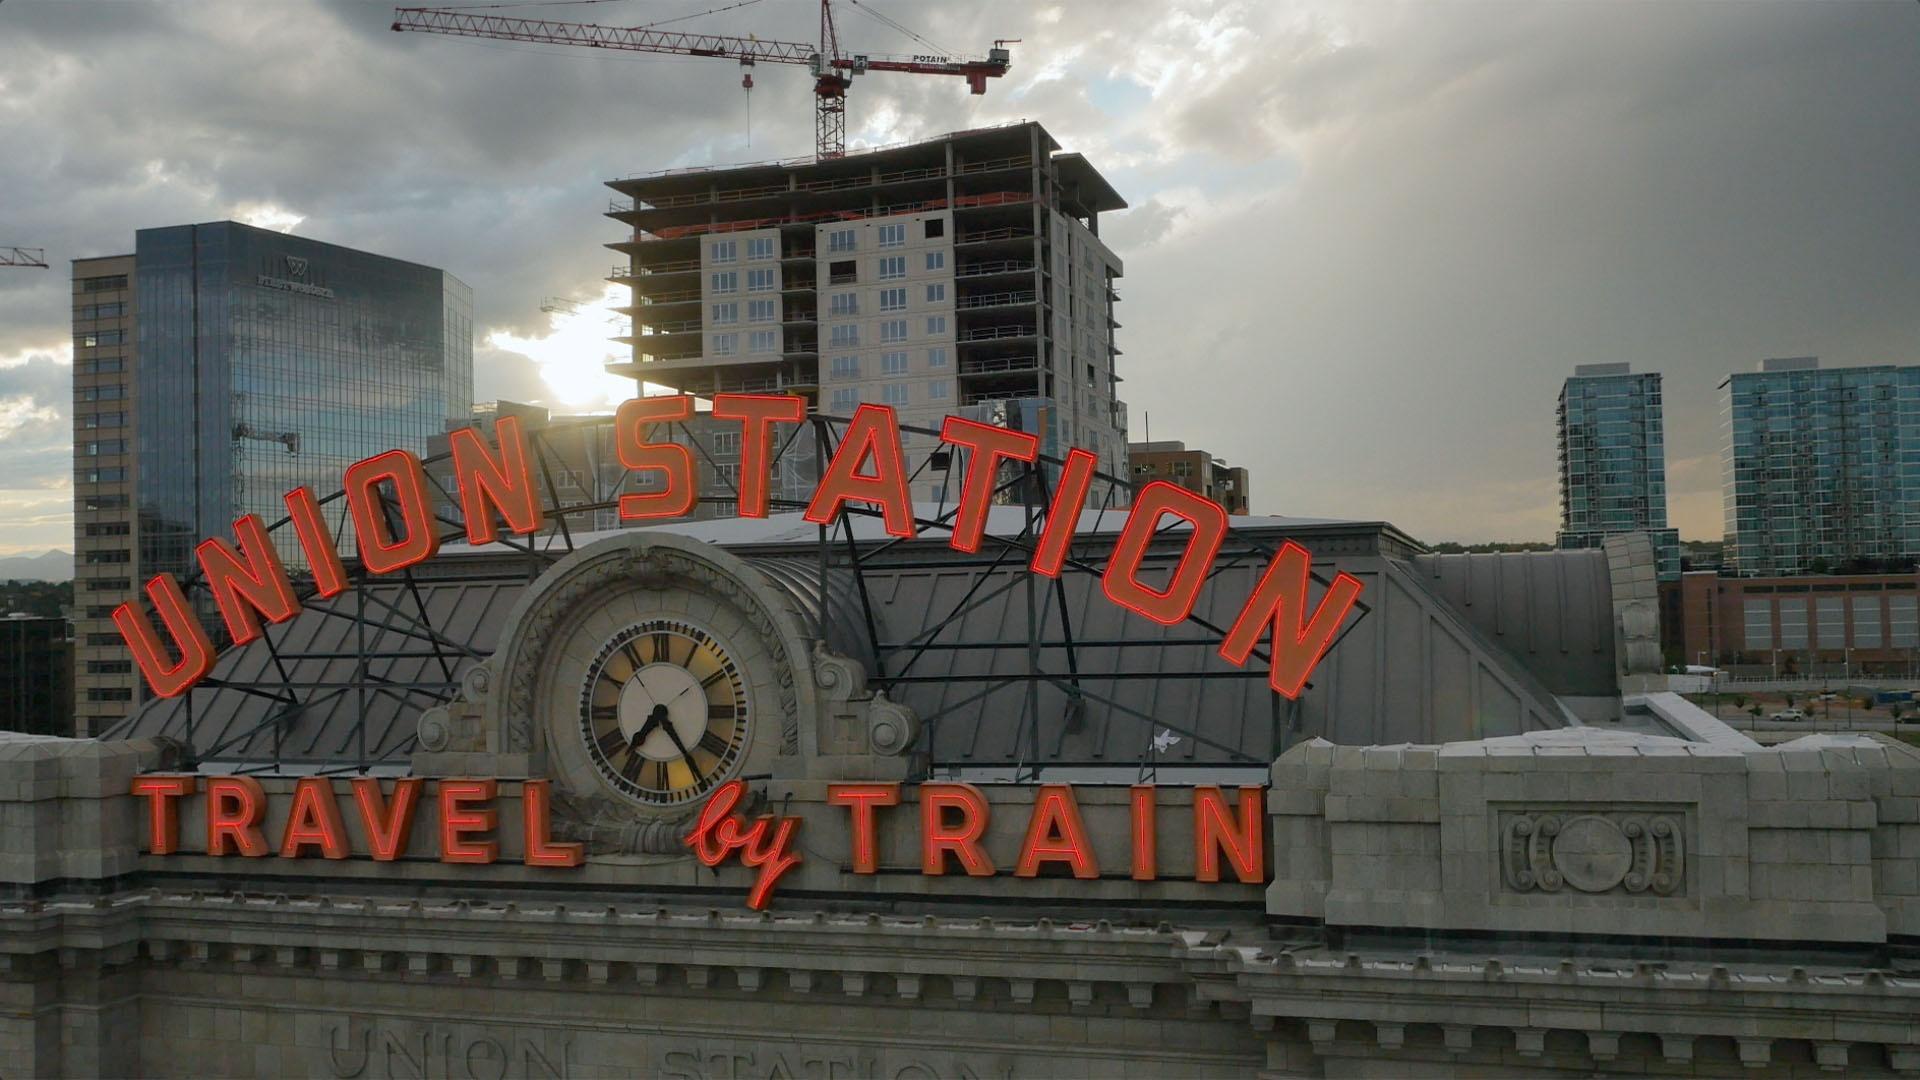 Closeup image of Union Station in Denver